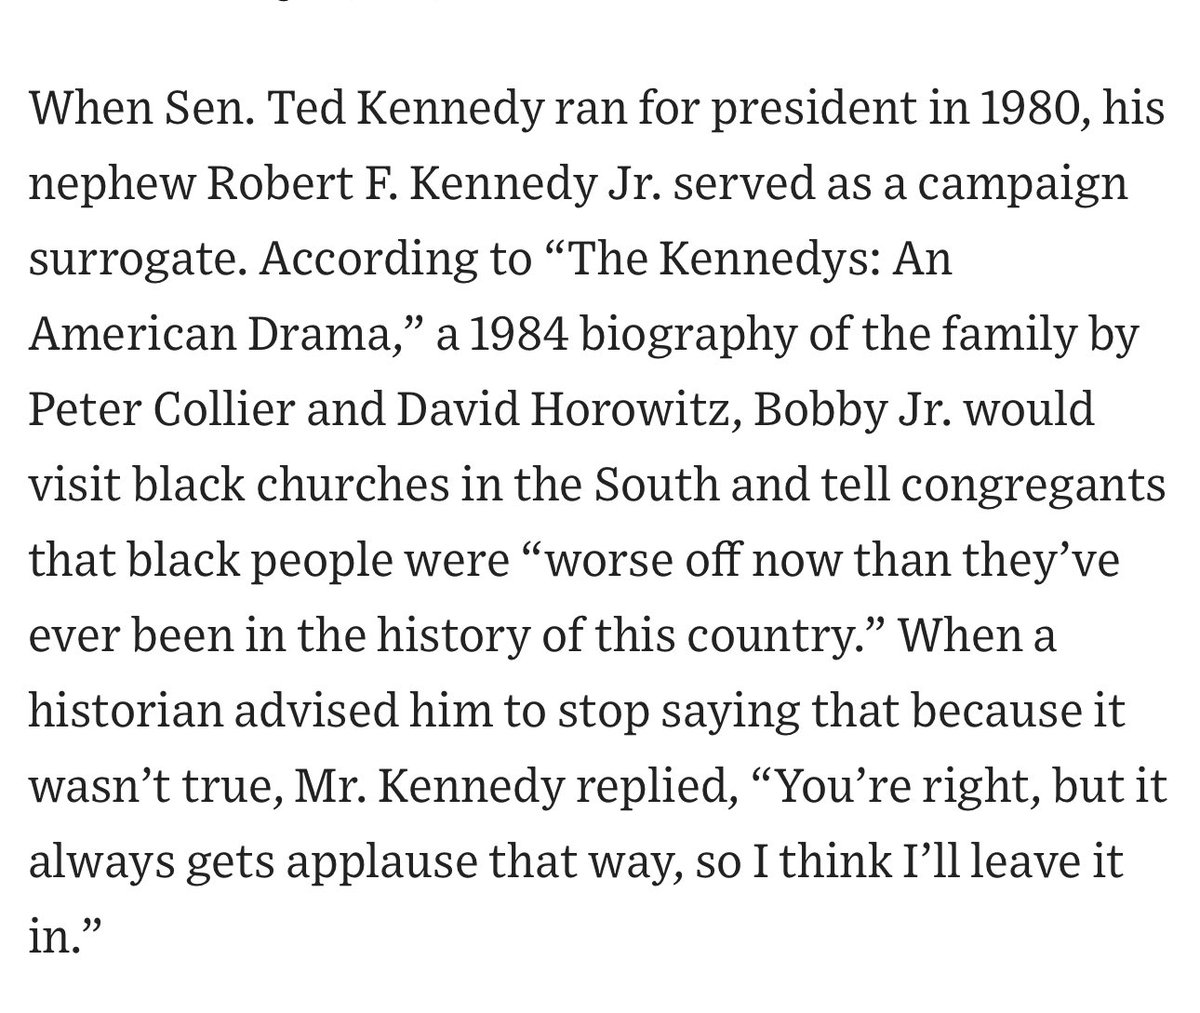 via @jasonrileywsj During Ted’s 1980 campaign, RFK Jr. “would visit black churches in the South and tell congregants that black people were ‘worse off now than they’ve ever been in the history of this country.’” wsj.com/articles/trump…